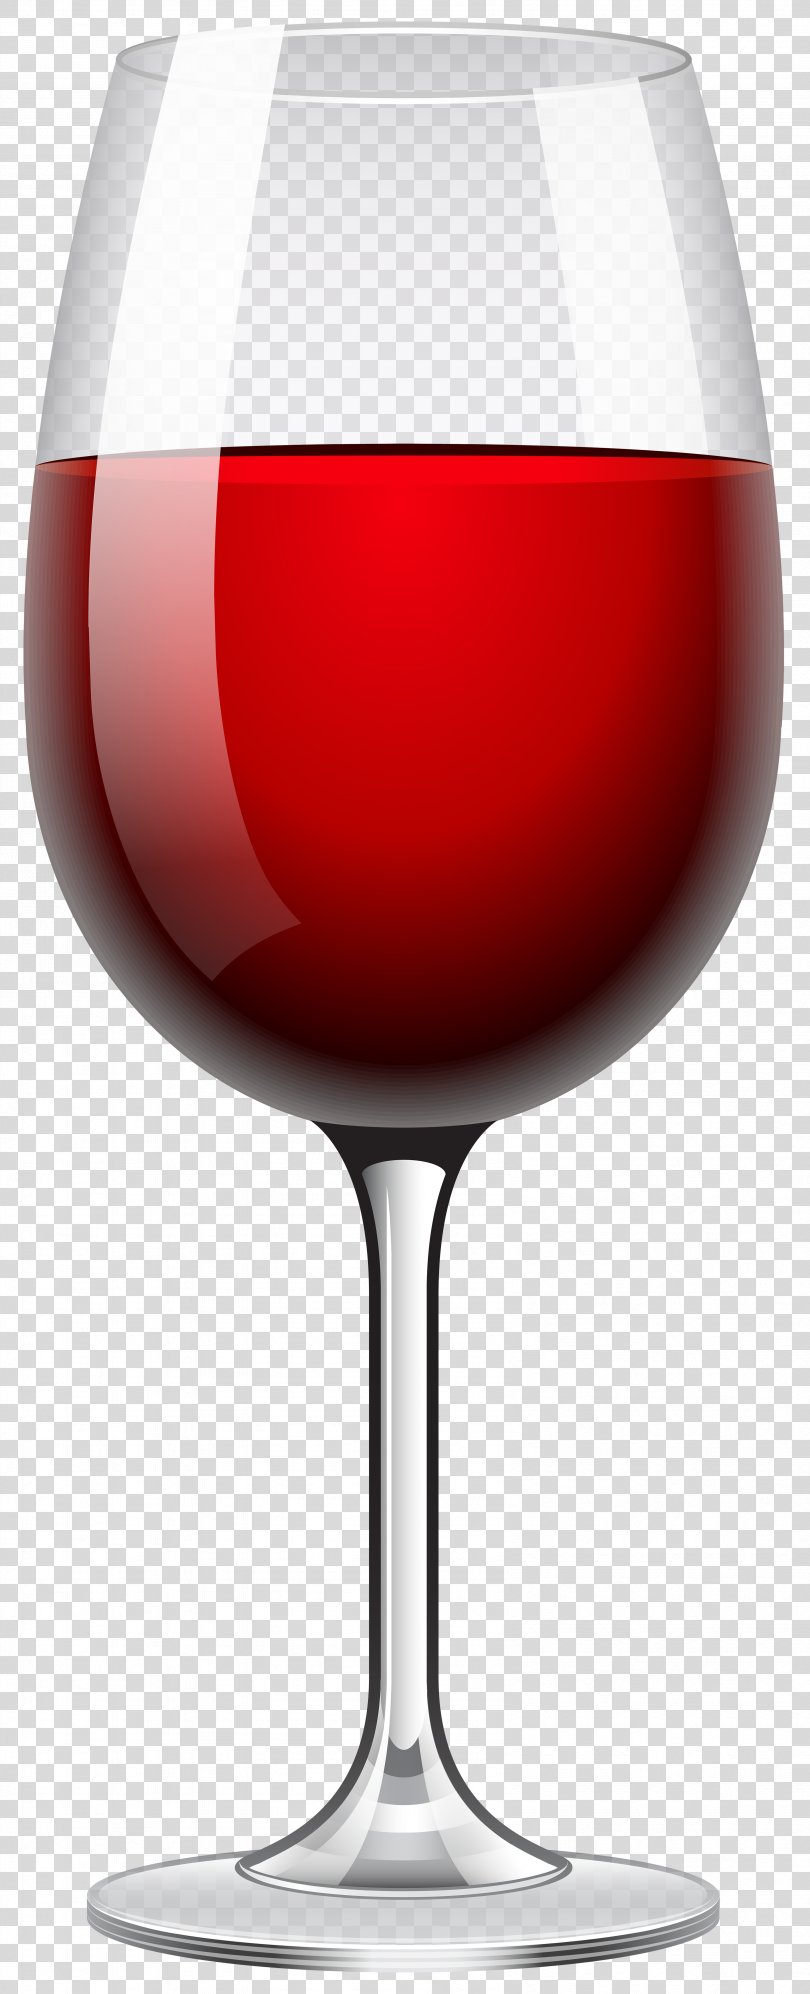 Red Wine White Wine Champagne Wine Glass, Red Wine Glass Transparent Clip Art Image PNG